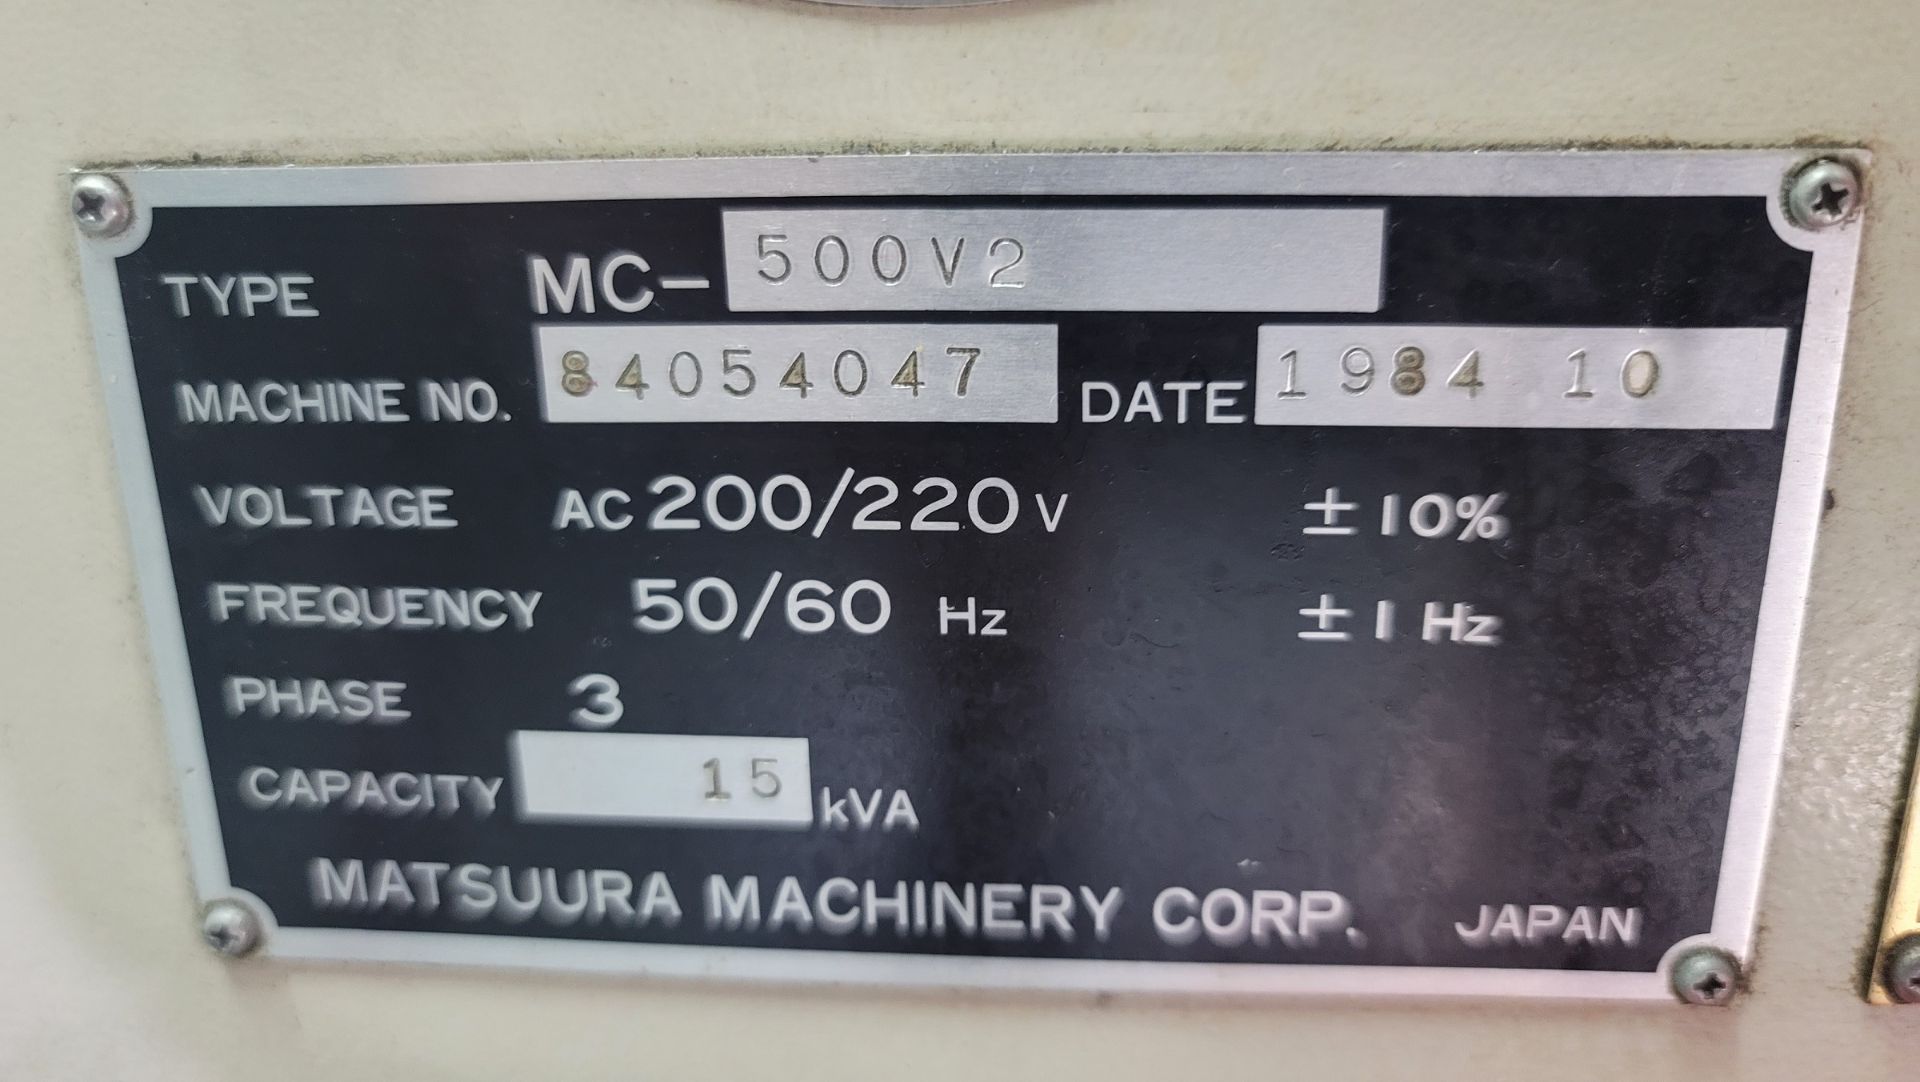 1984 MATSUURA MC-500V2 VERTICAL MACHINING CENTER, YASNAC CONTROL, S/N 84054047, **IMMEX REGISTERED - Image 8 of 10